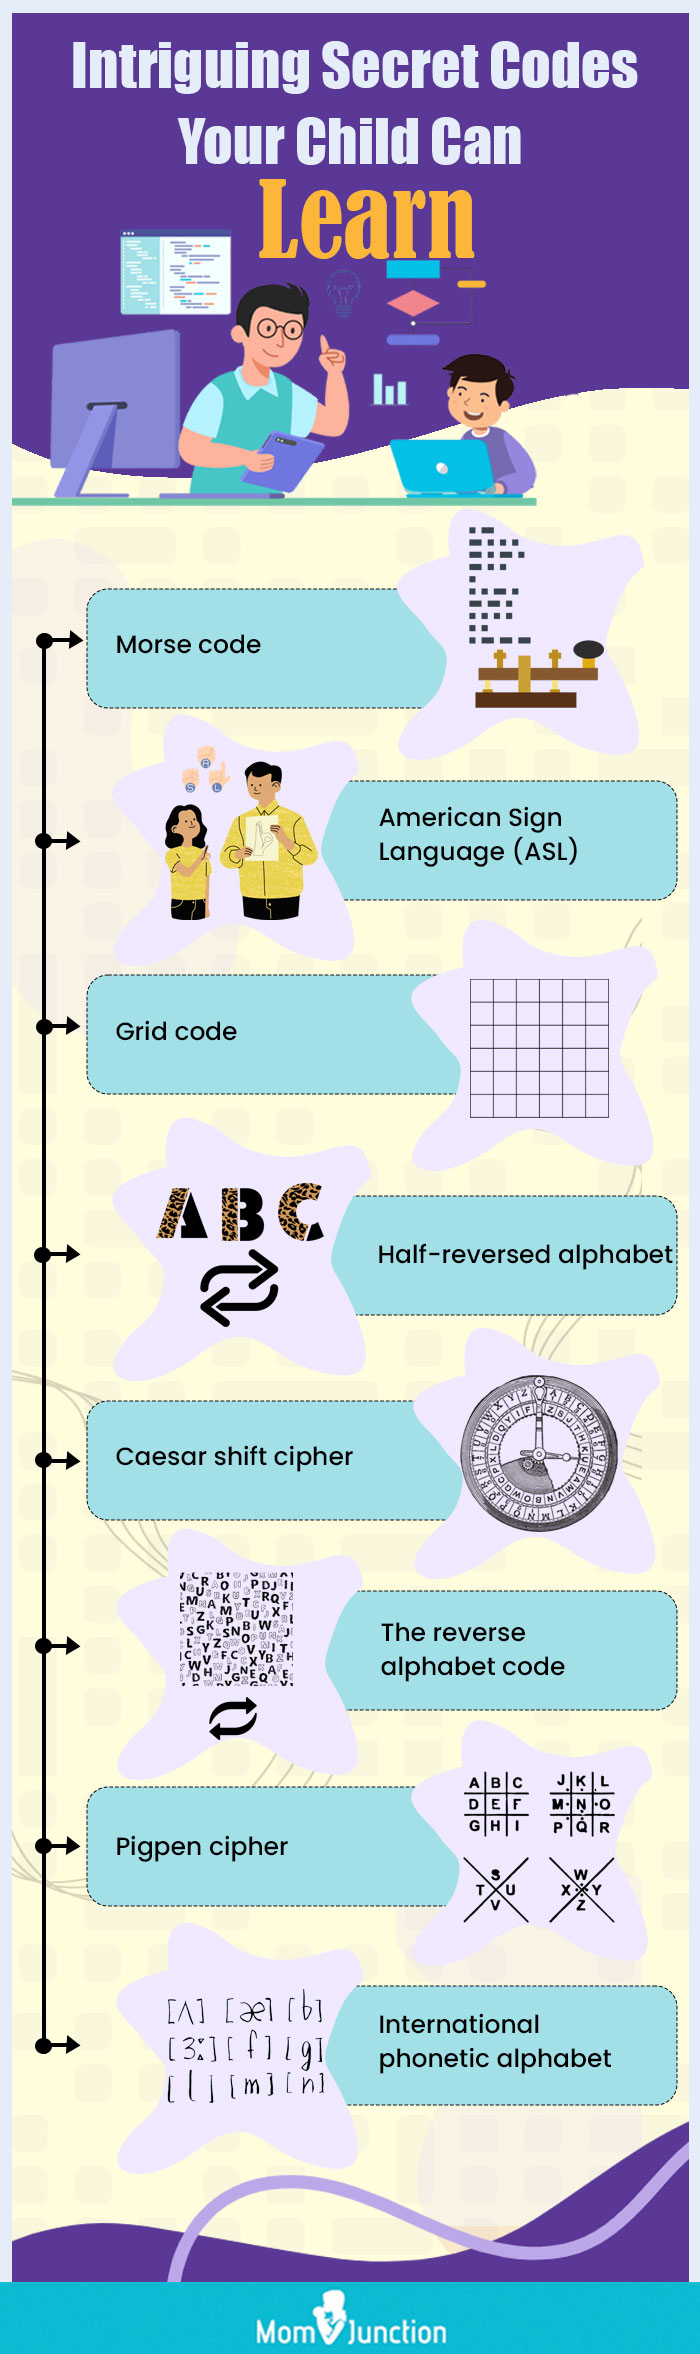 intriguing secret codes your child can learn (infographic)